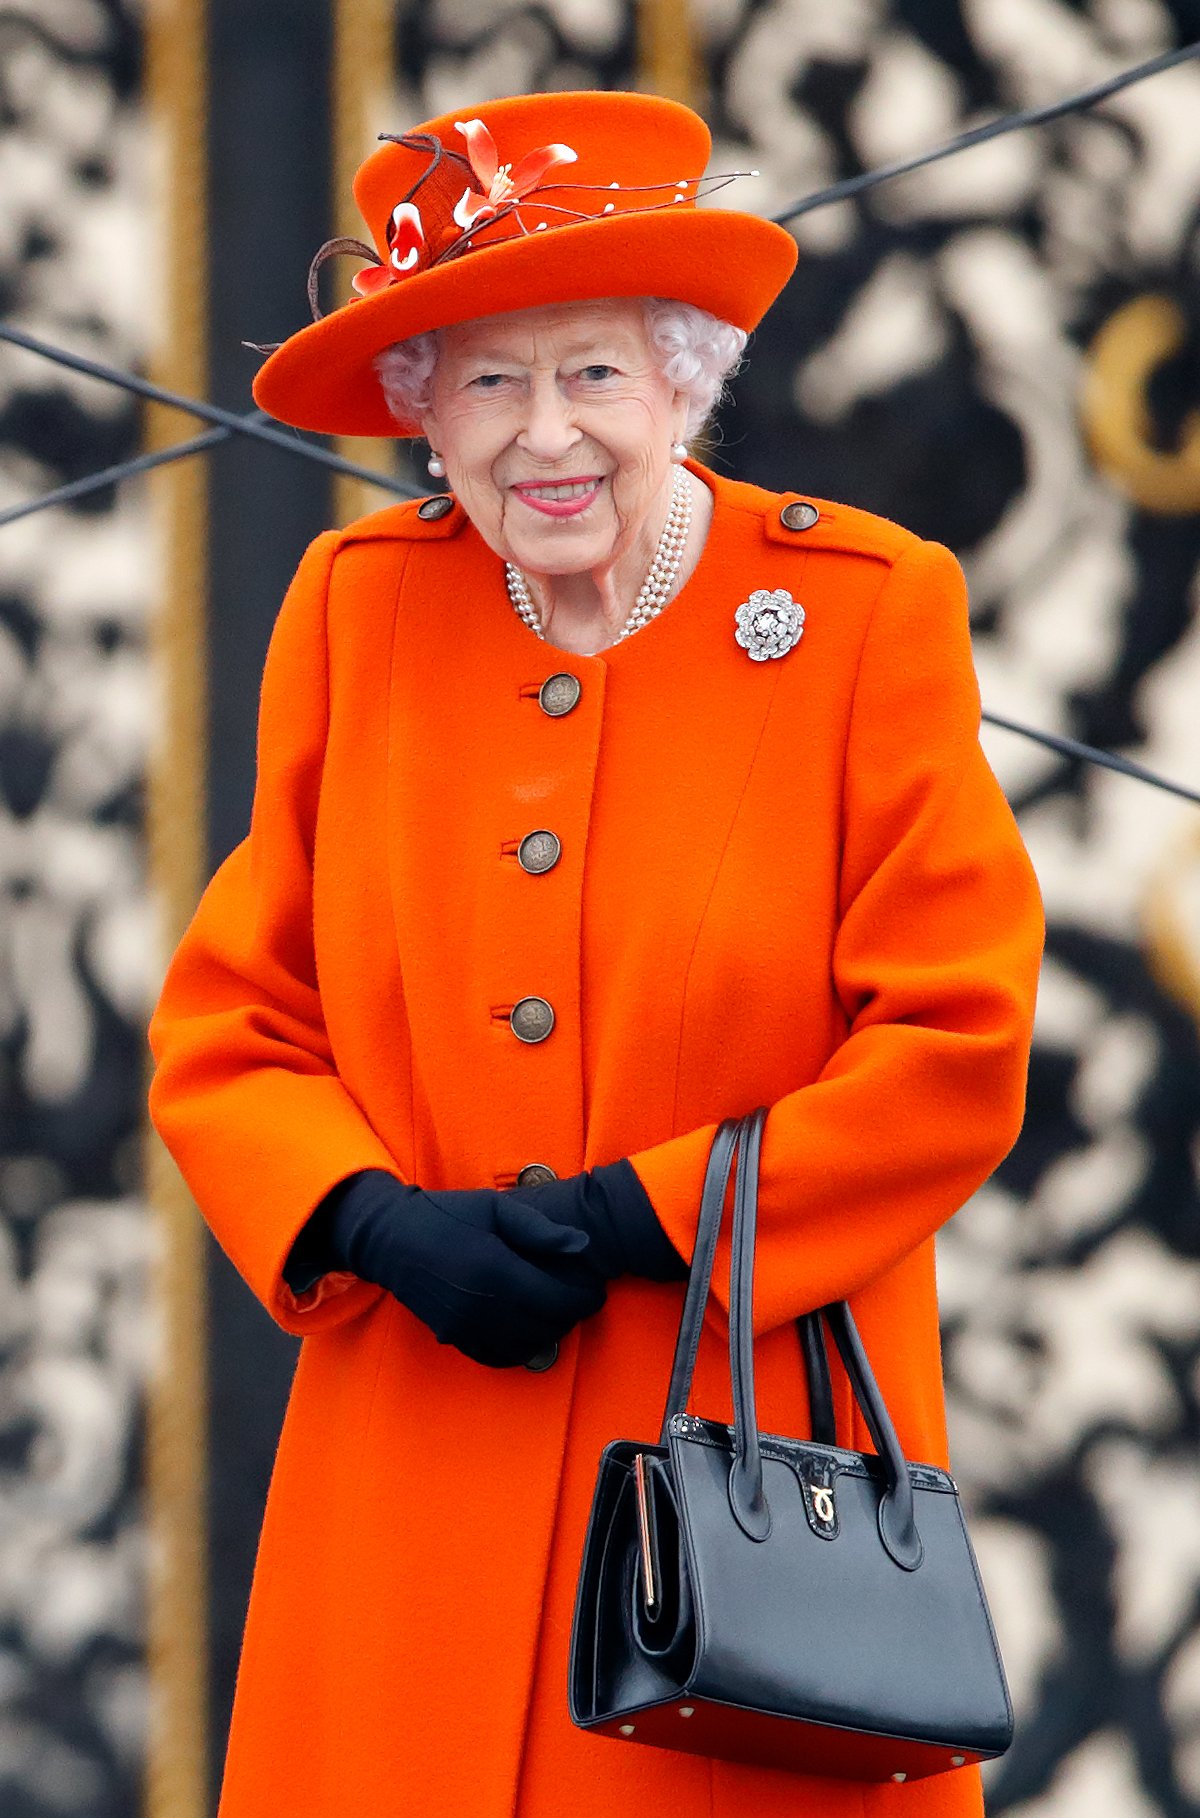 Queen Elizabeth II attends the launch of the Queen's Baton Relay for Birmingham 2022, the XXII Commonwealth Games at Buckingham Palace